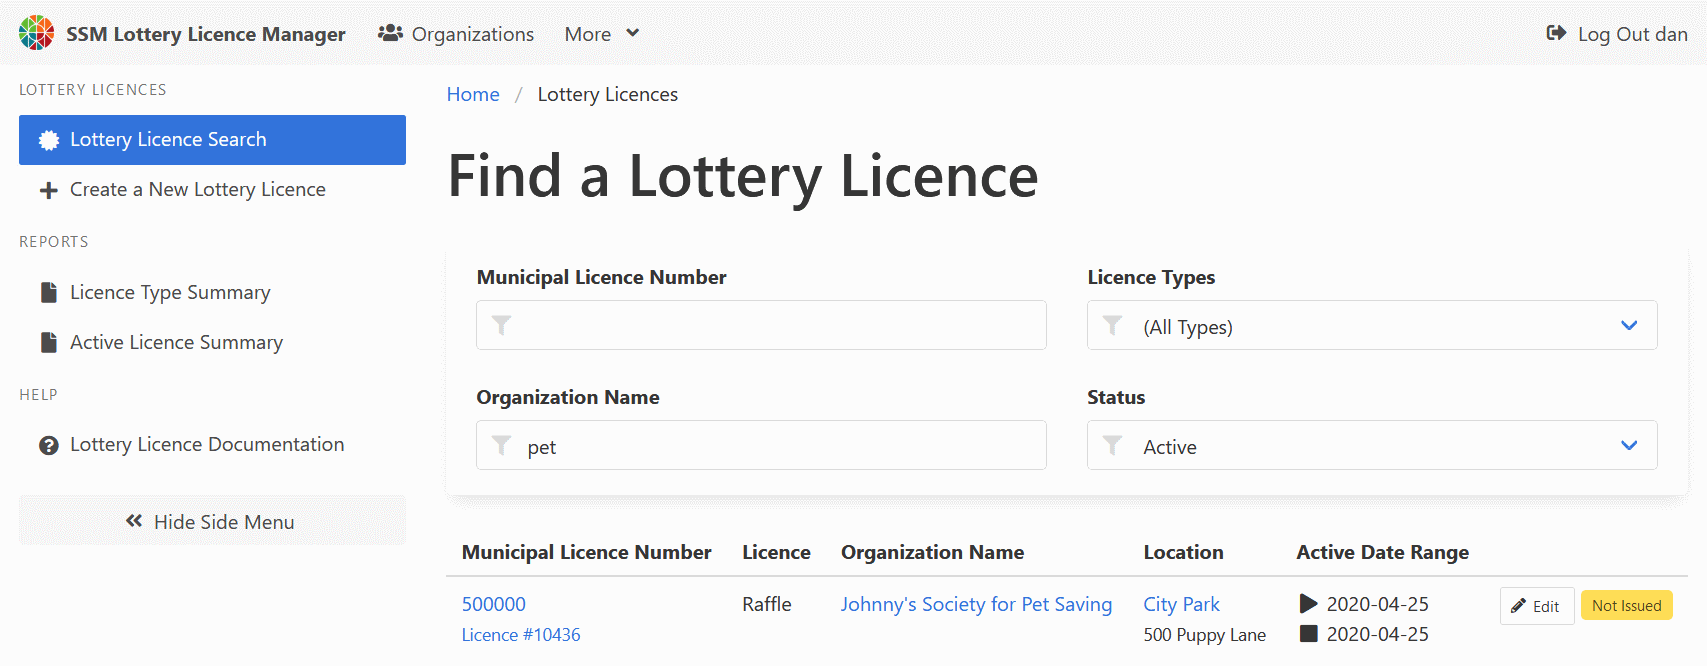 Lottery Licence Search